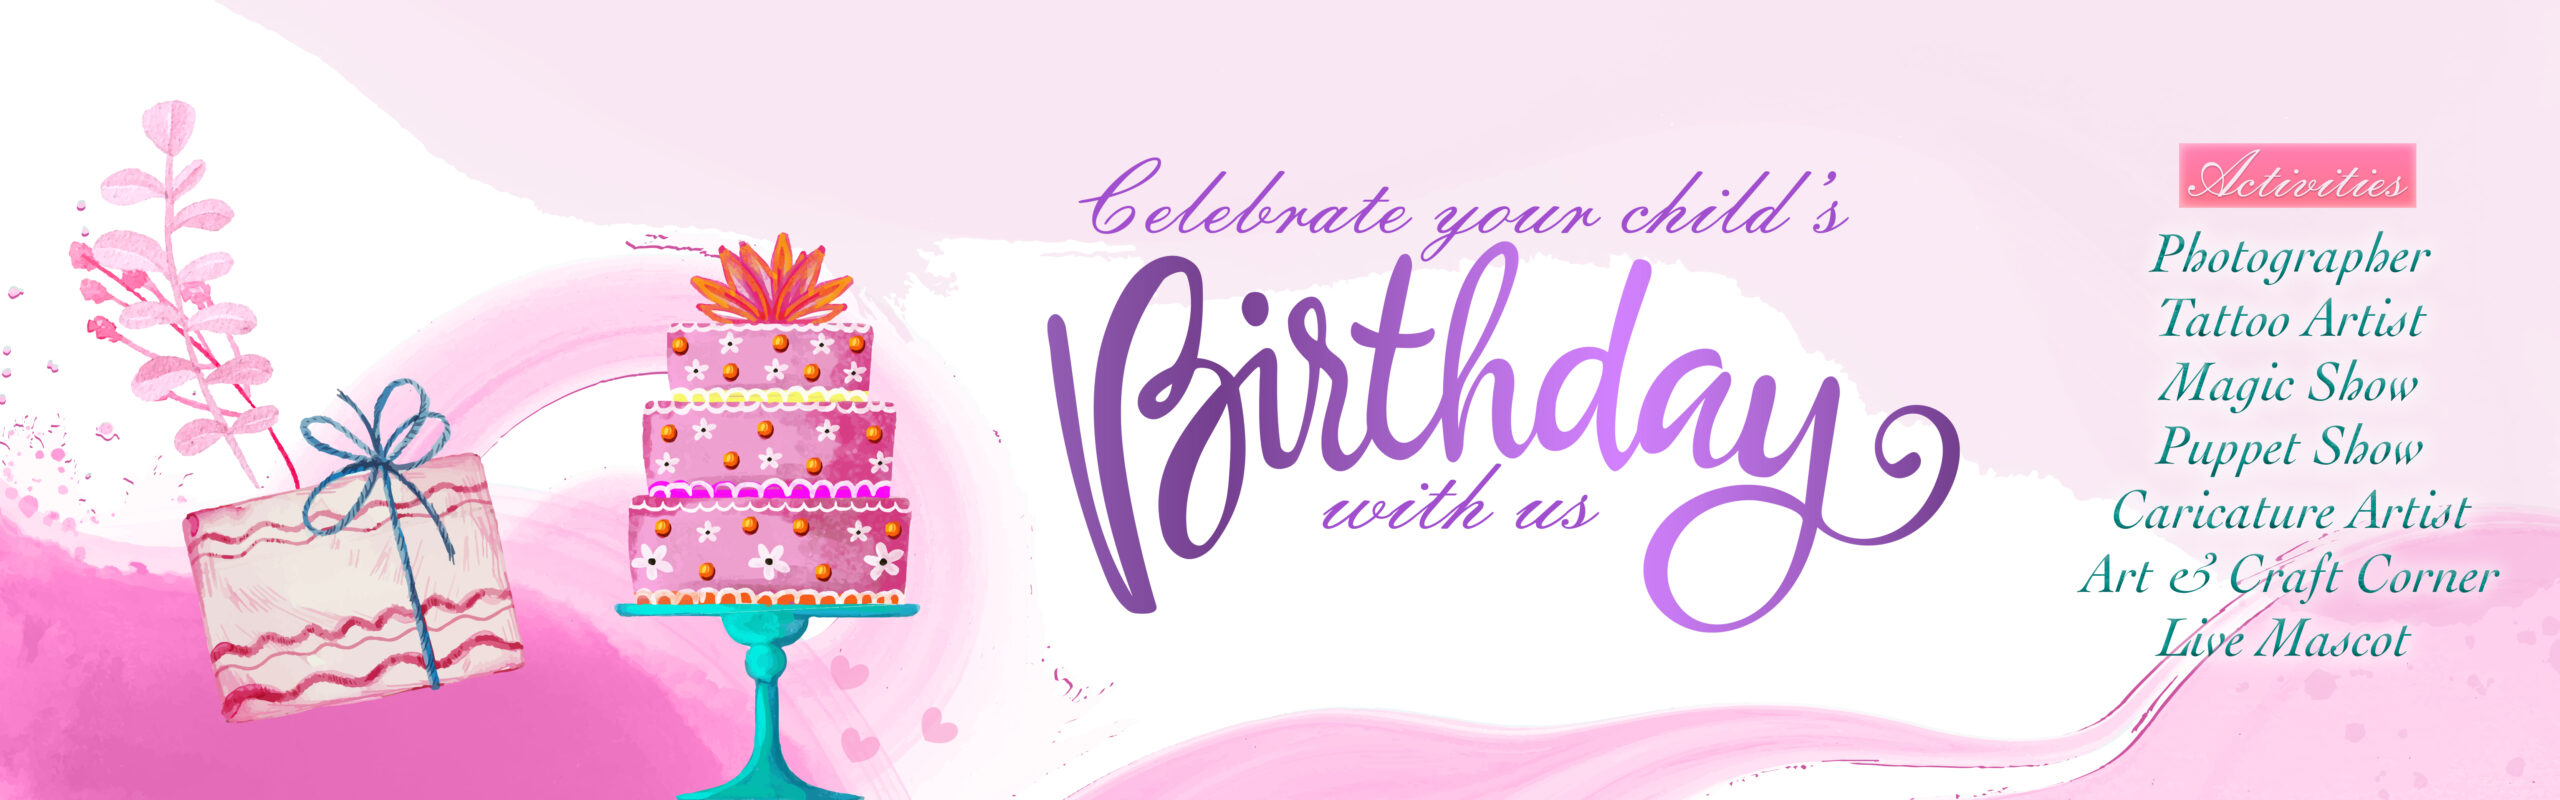 party jumpers_Web bannerBIRTHDAY